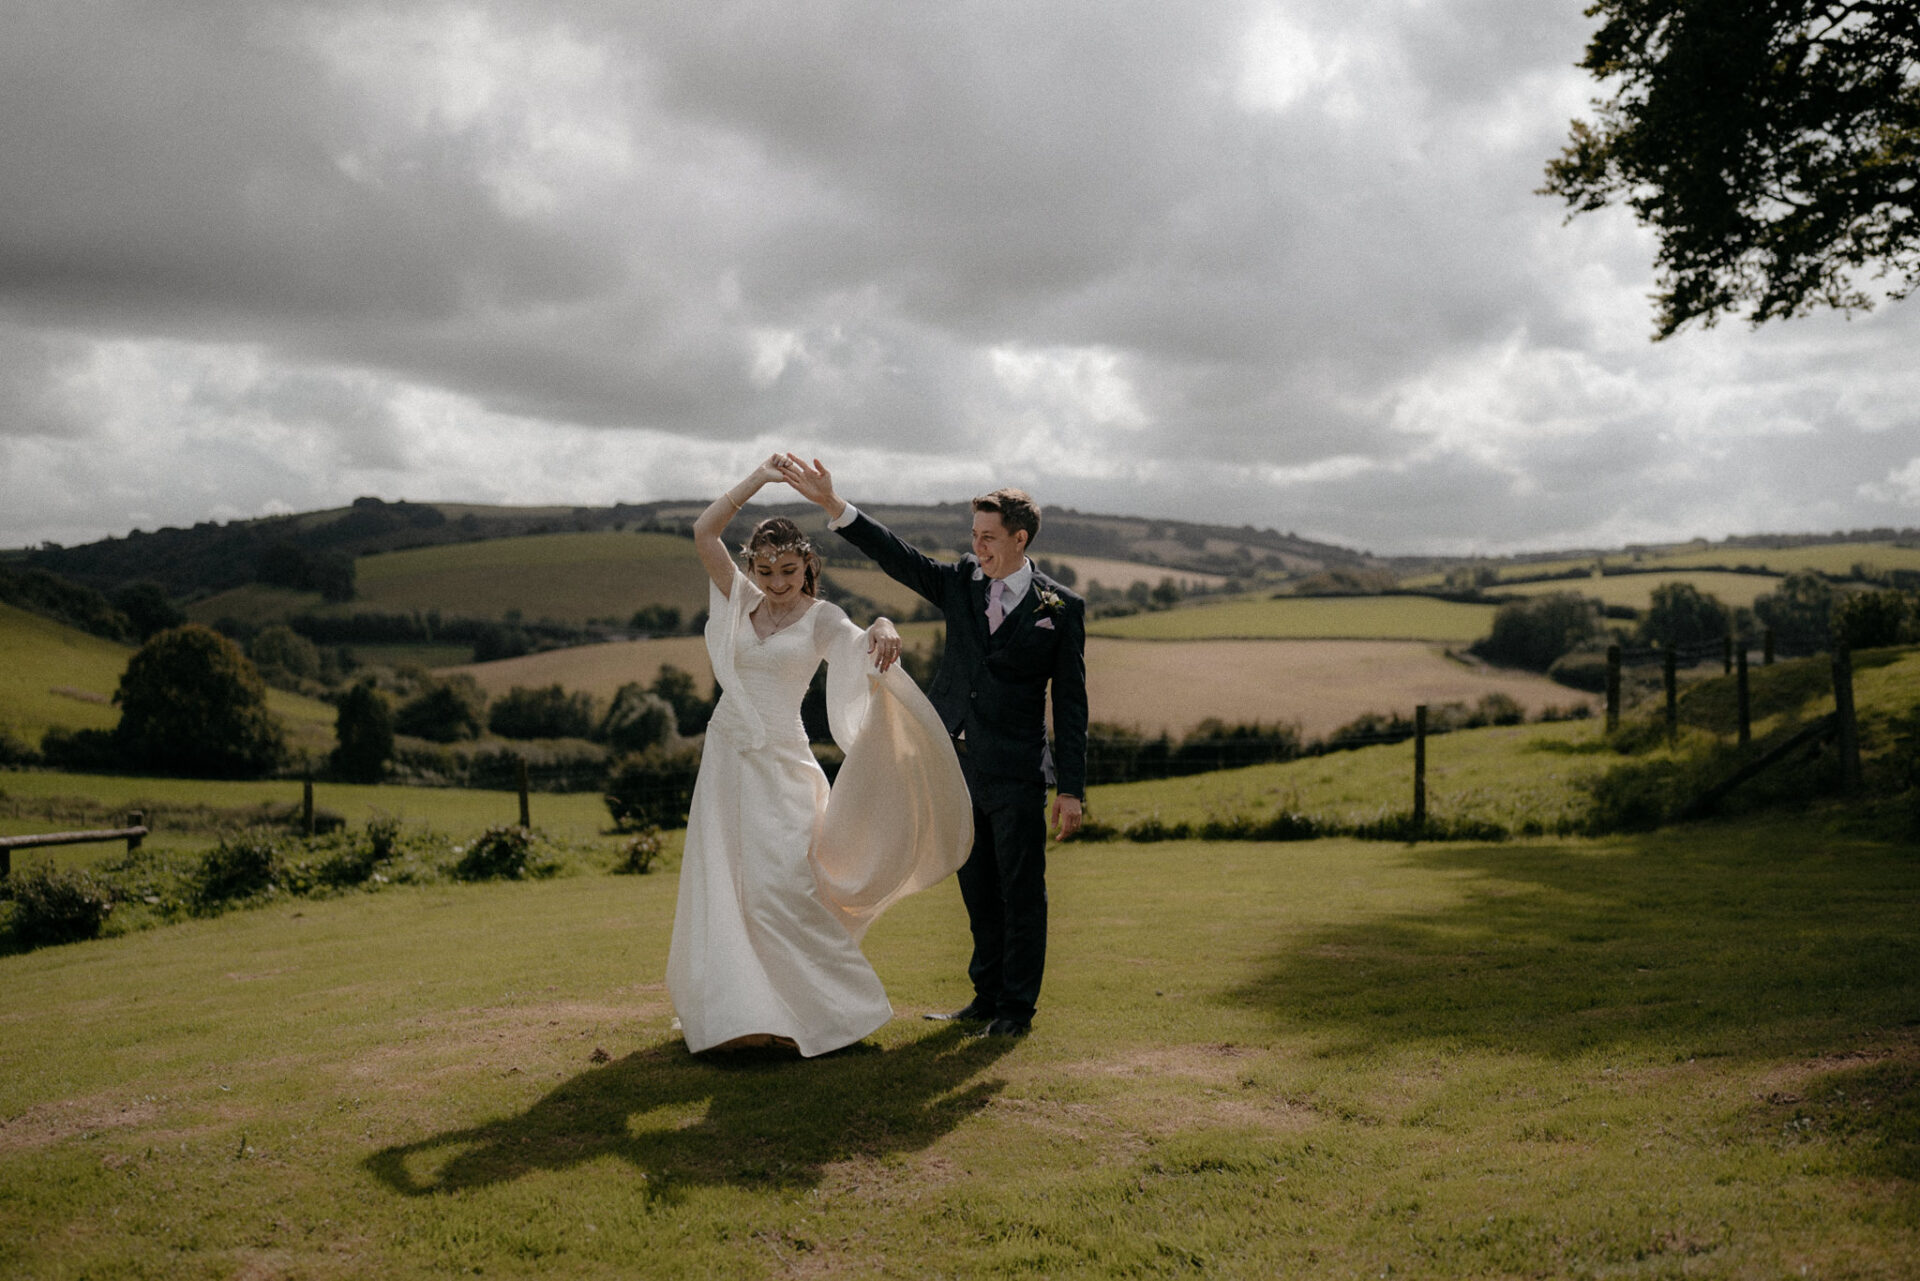 A recent wedding of a bride and groom captured in a field under a cloudy sky.